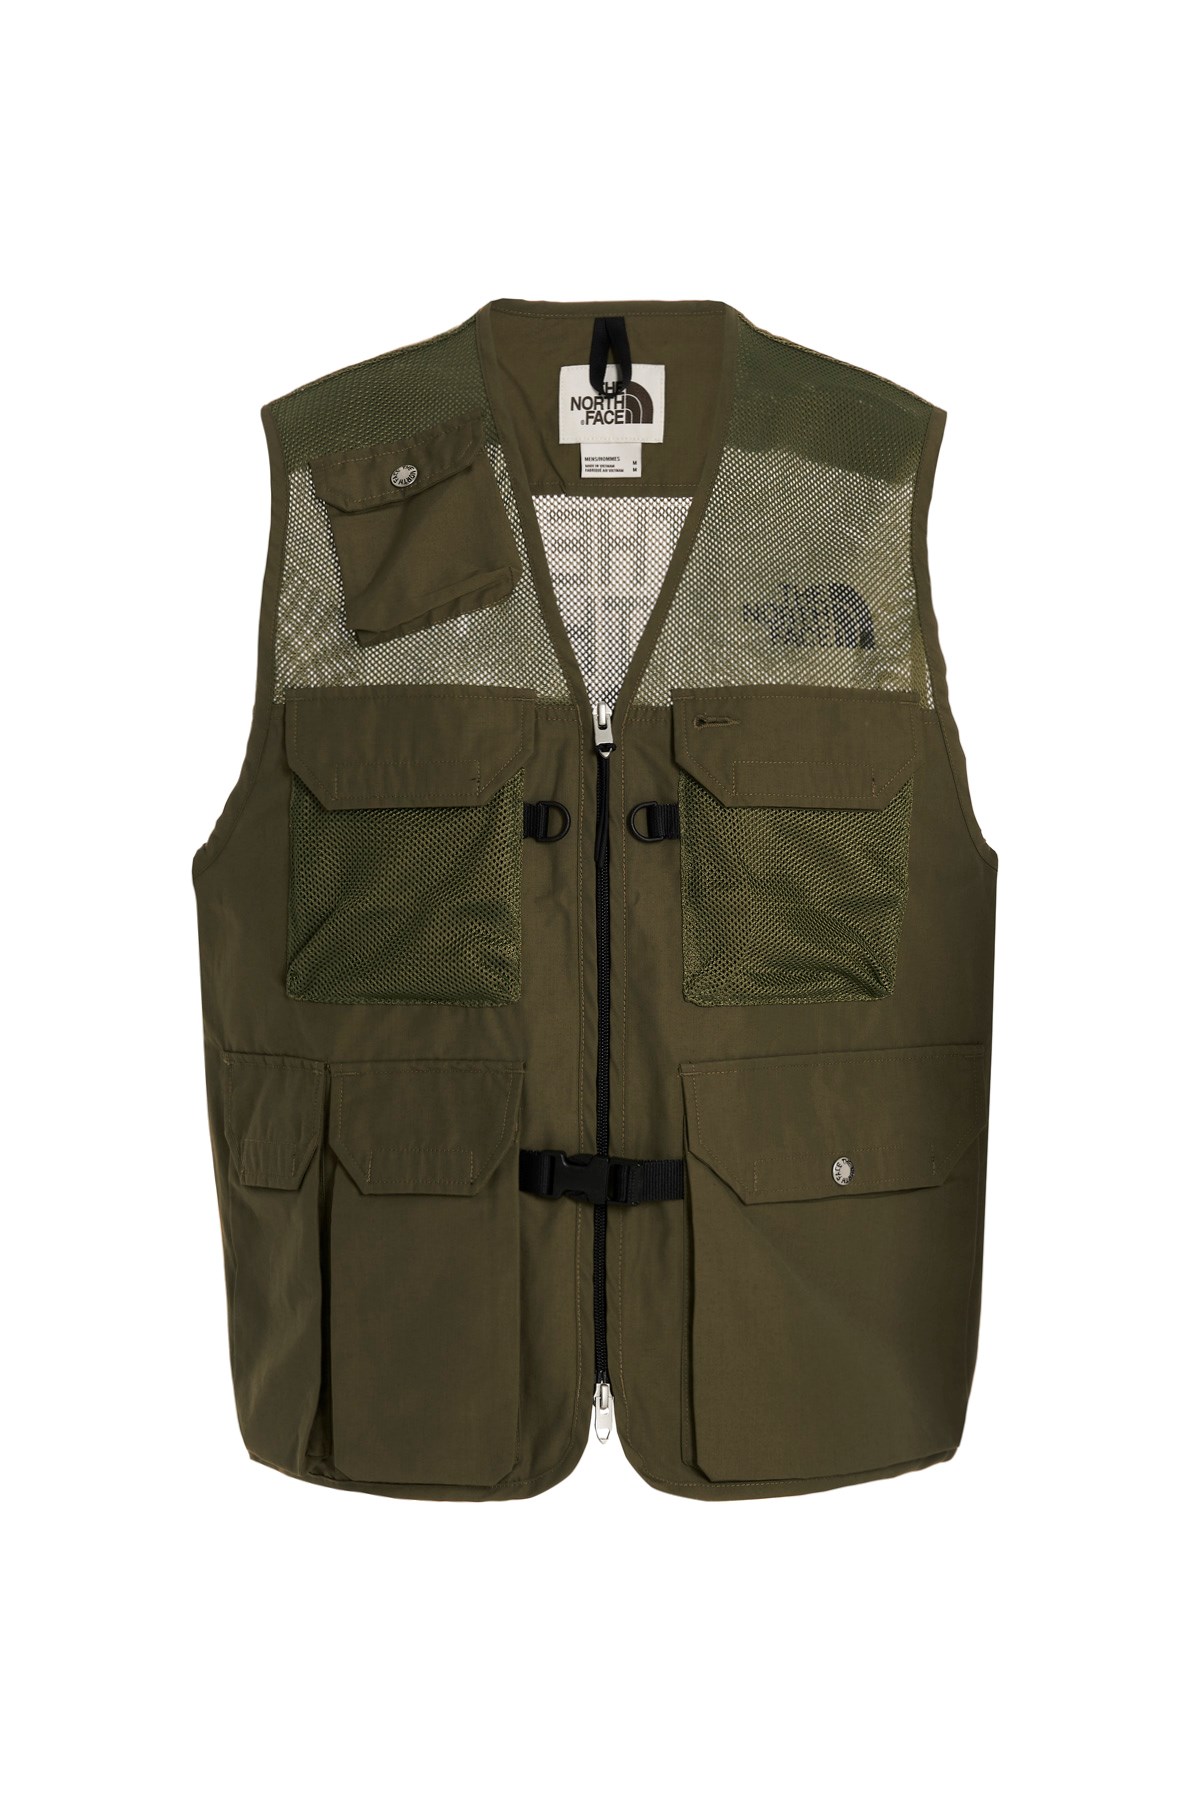 THE NORTH FACE 'M66 Utility Field' Gilet